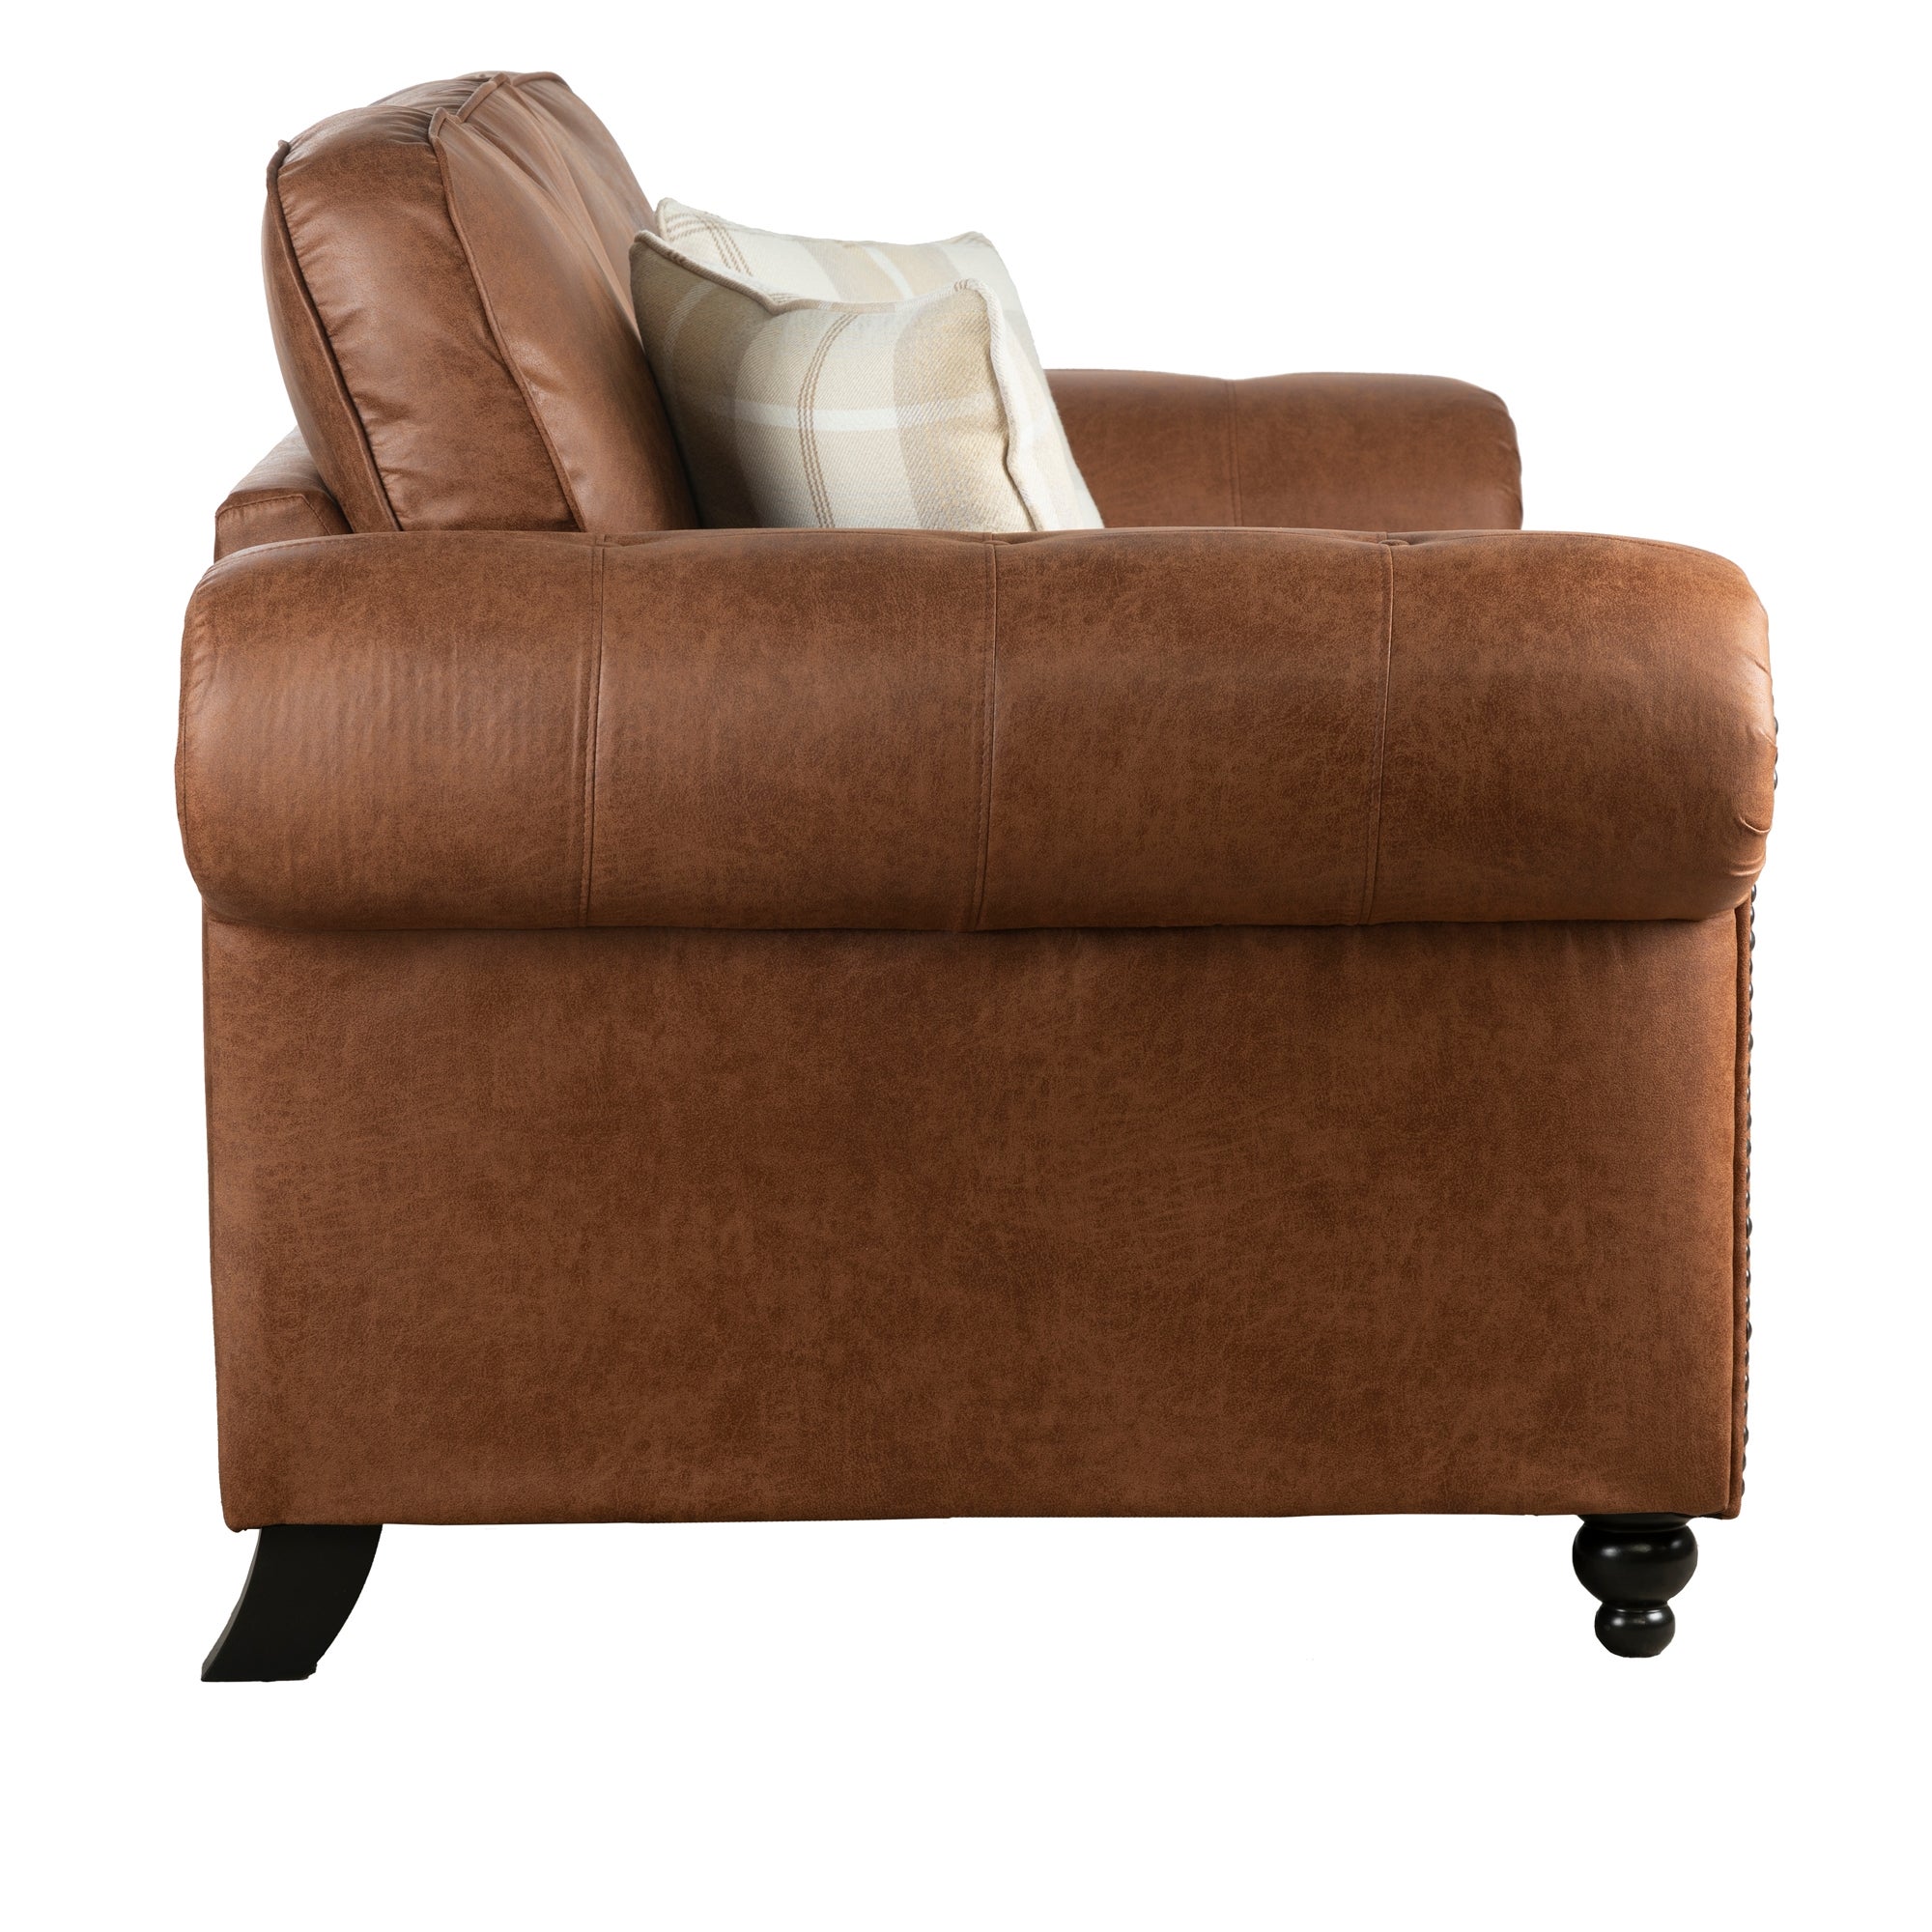 Oakland Soft Faux Leather 2 Seater Sofa Brown